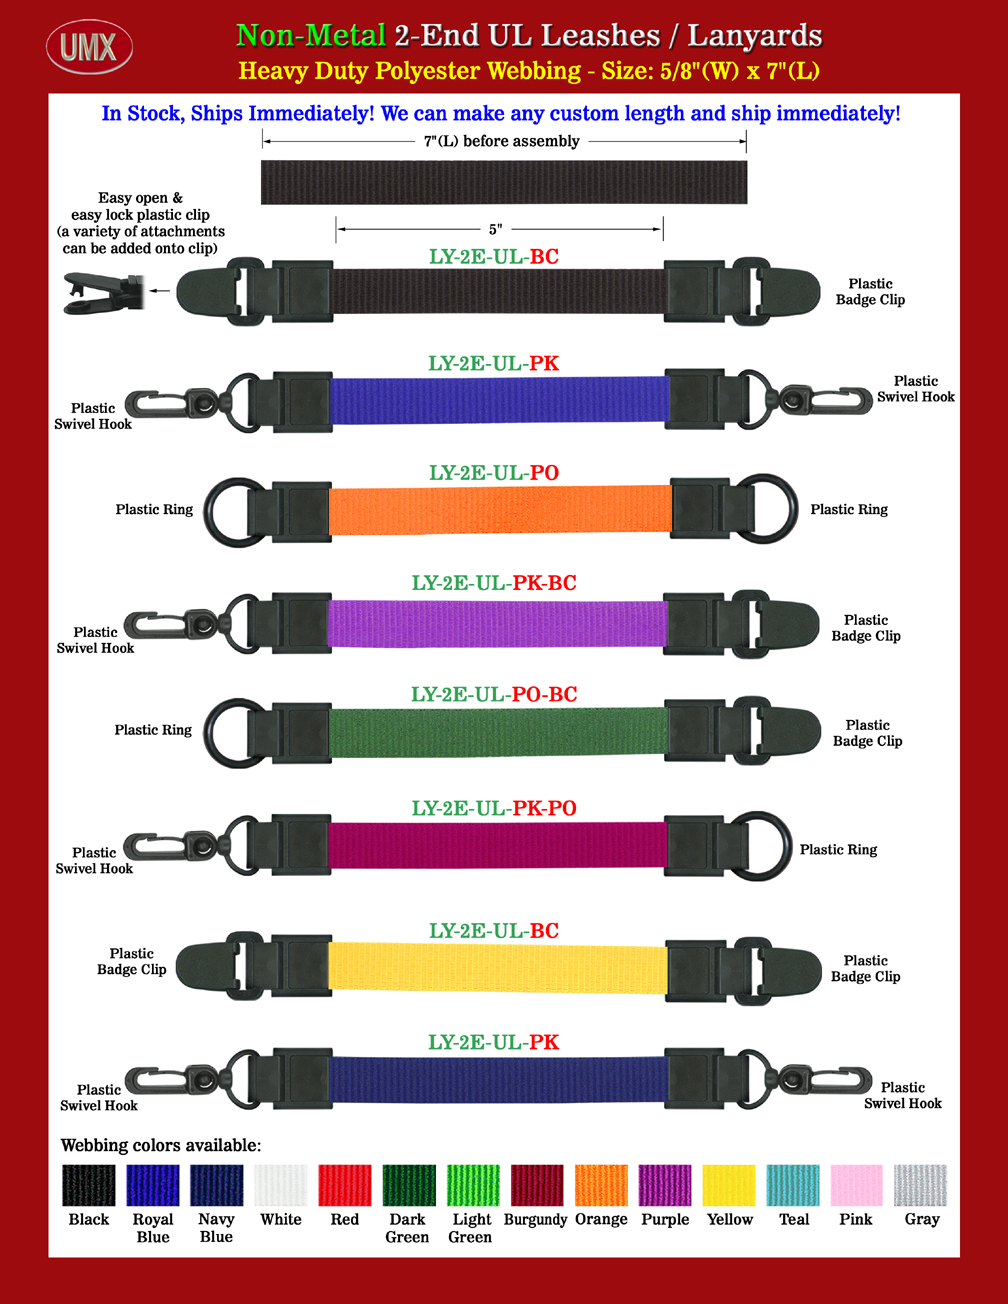 5/8" Plain Color Universal Link All Plastic 2-End Lanyards - Scan-Safe Leashes With 13-Colors In Stock.